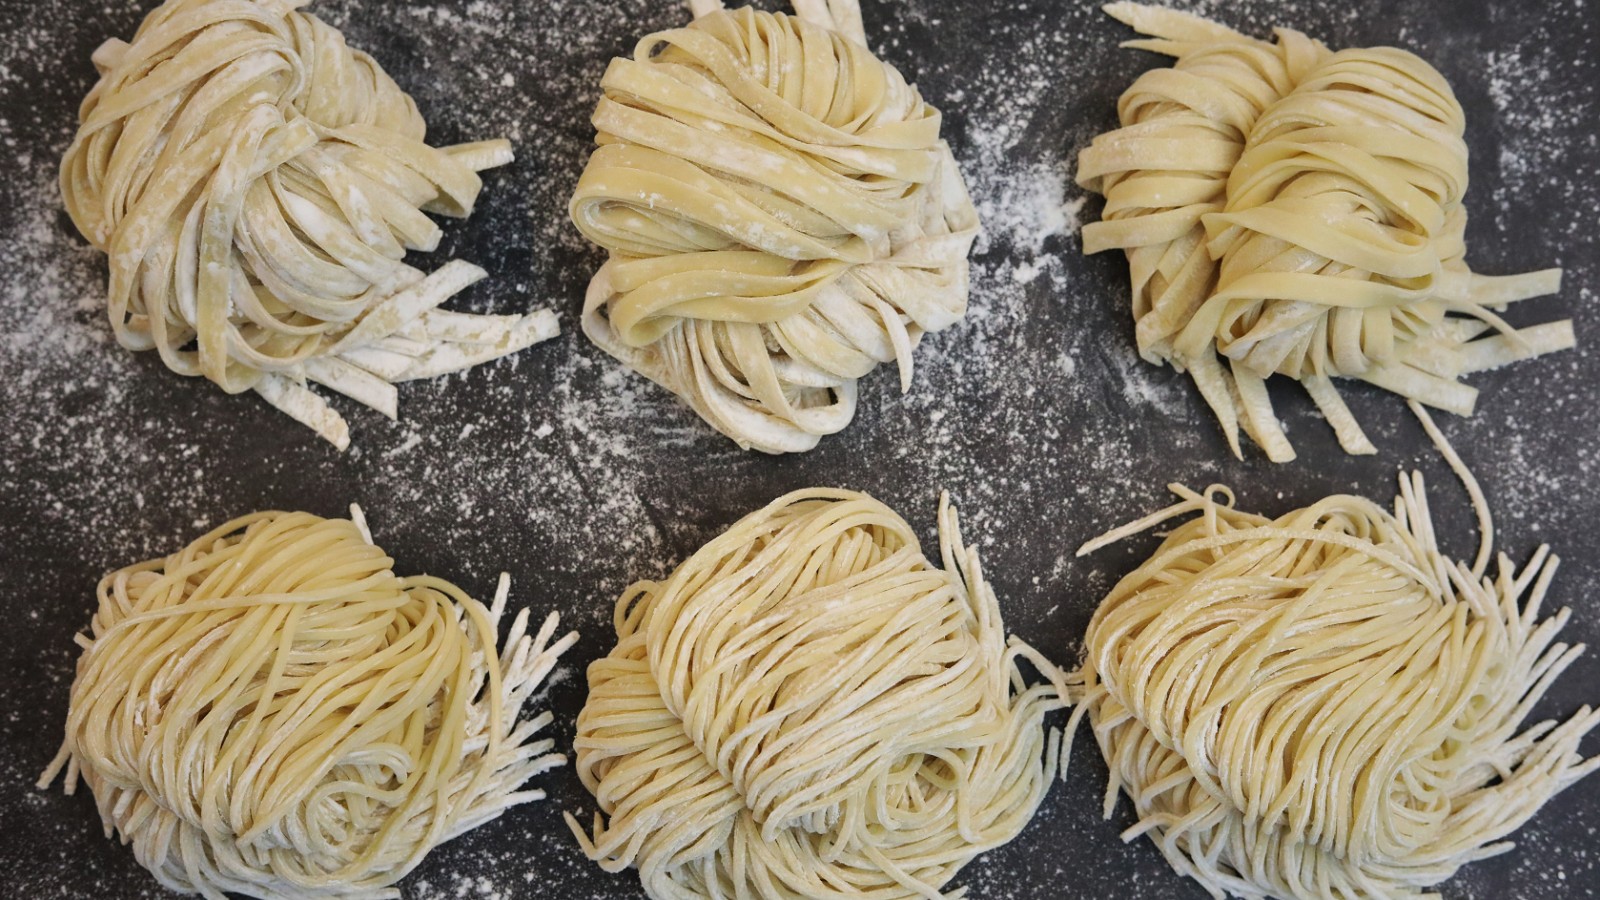 Image of Homemade Chinese Noodles With a Kitchenaid Mixer